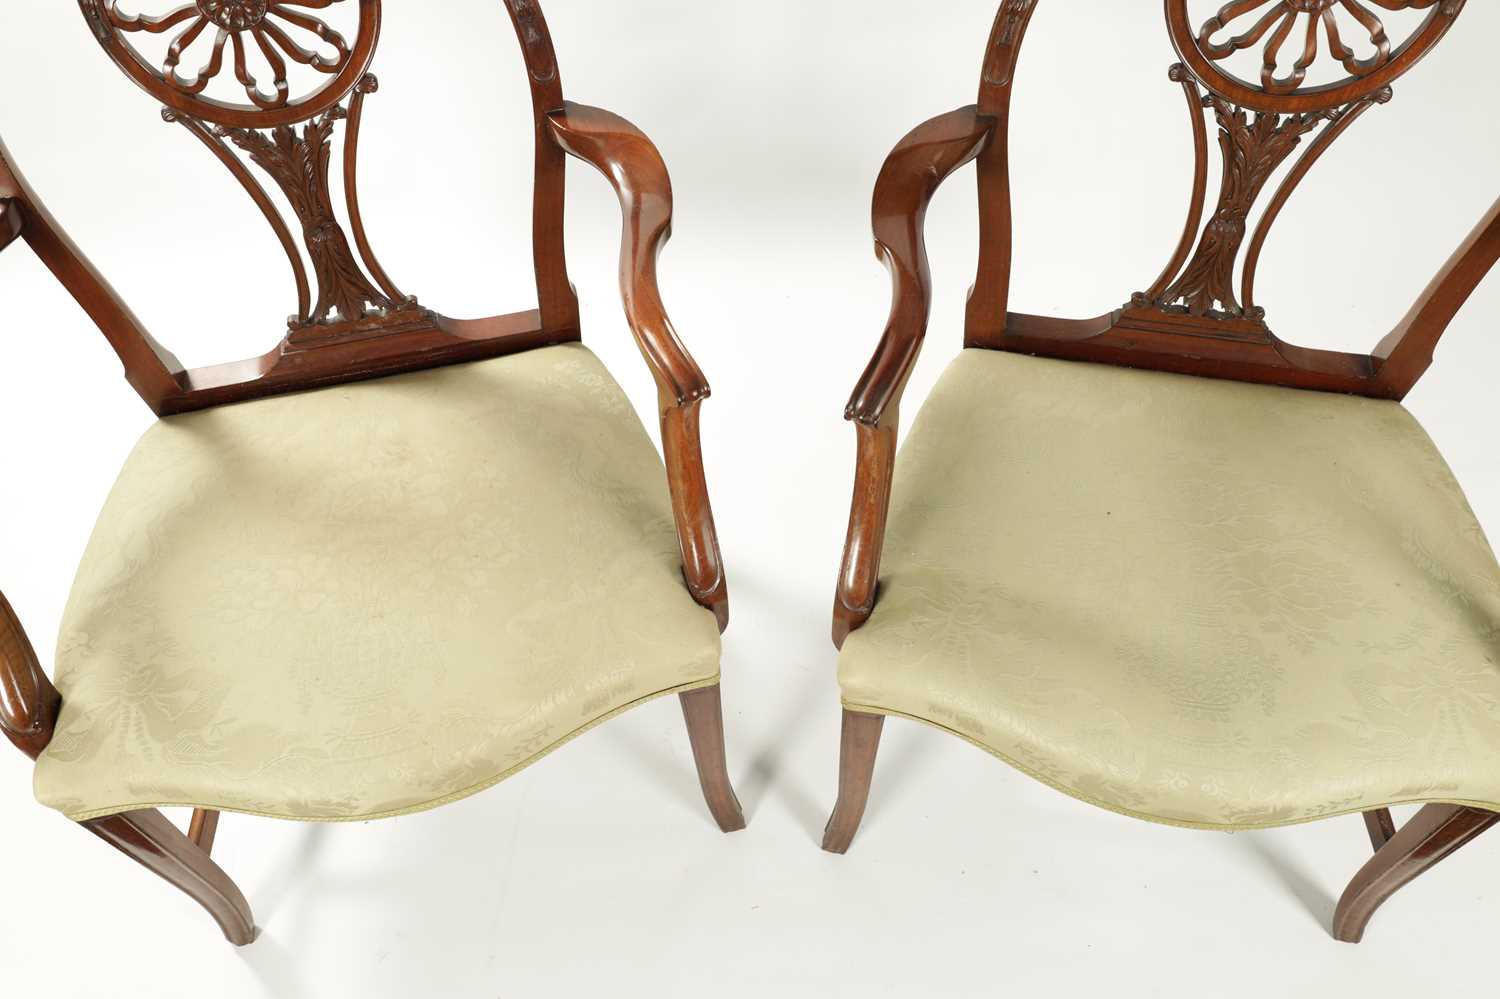 A PAIR OF 19TH CENTURY HEPPLEWHITE STYLE MAHOGANY ARMCHAIRS - Image 6 of 12